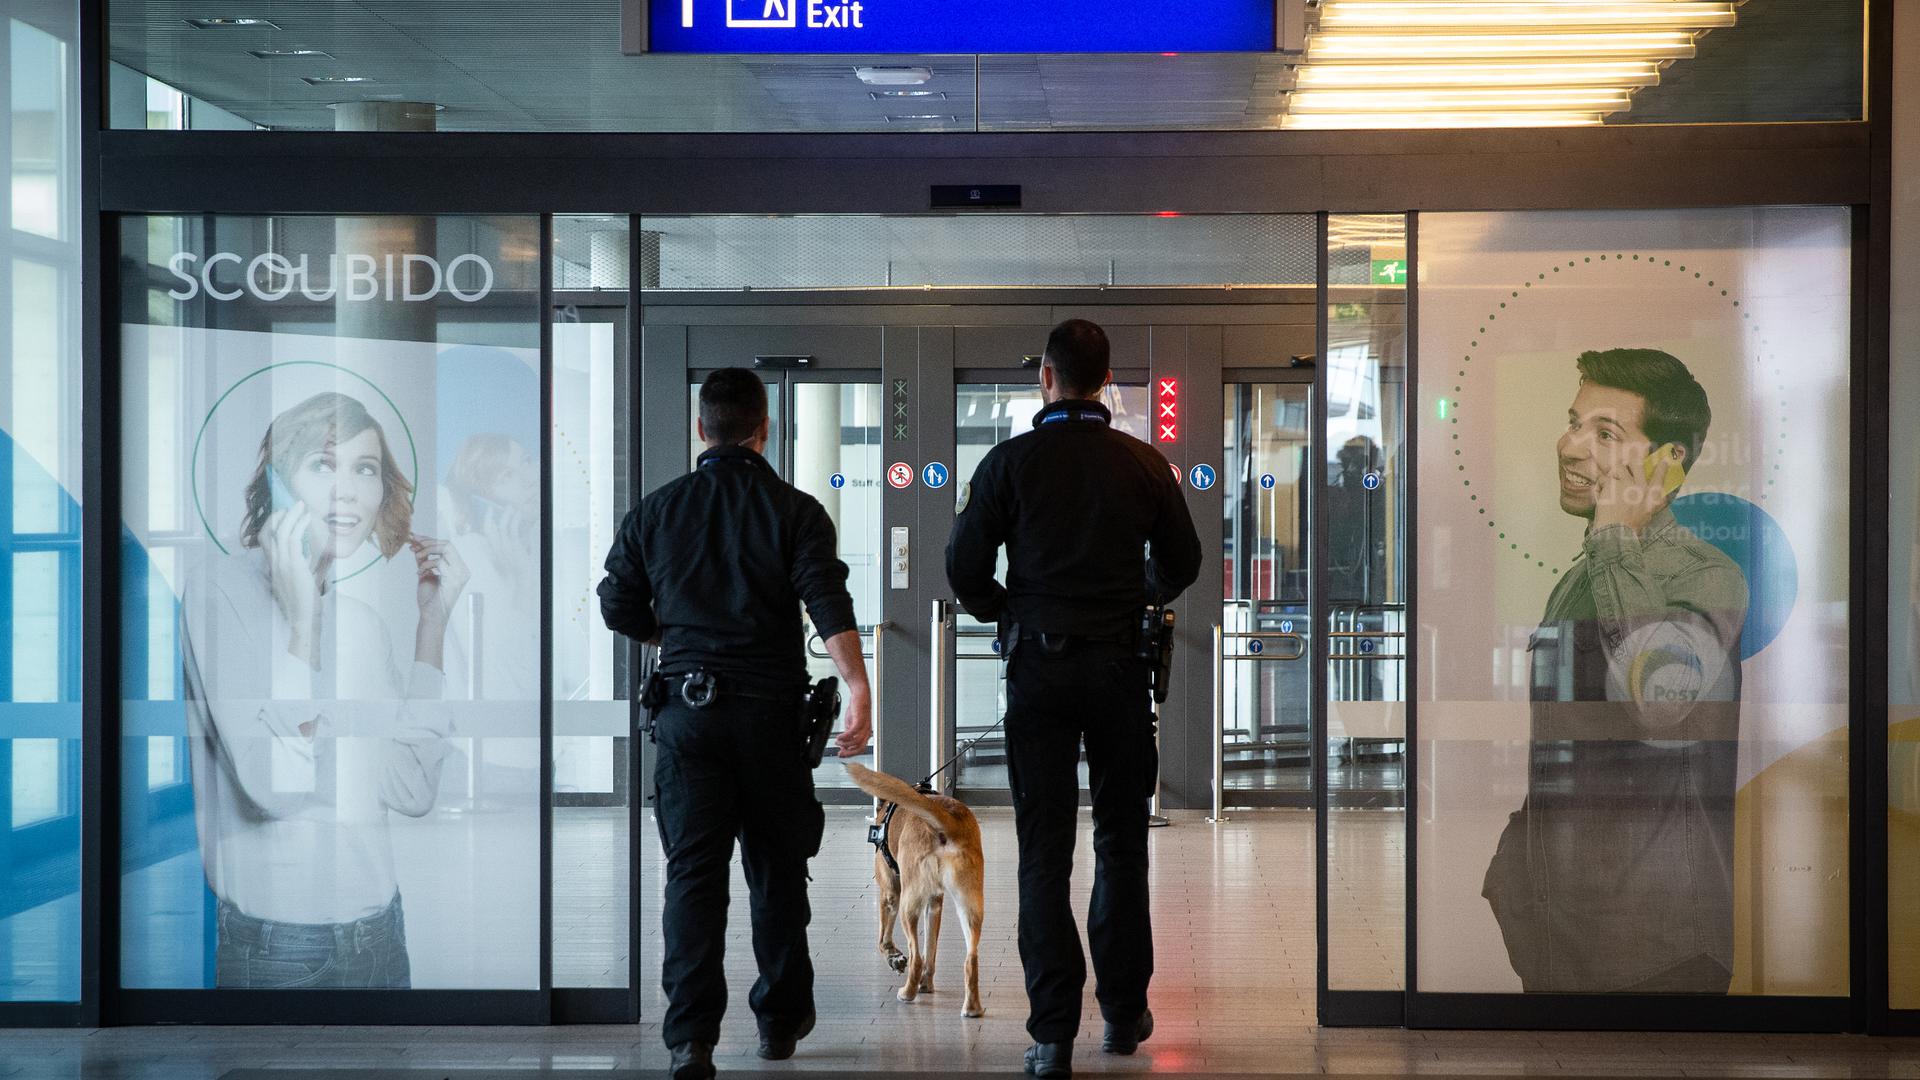 Luxembourg may deploy more police at the Luxembourg Airport in response to the EU's criticism